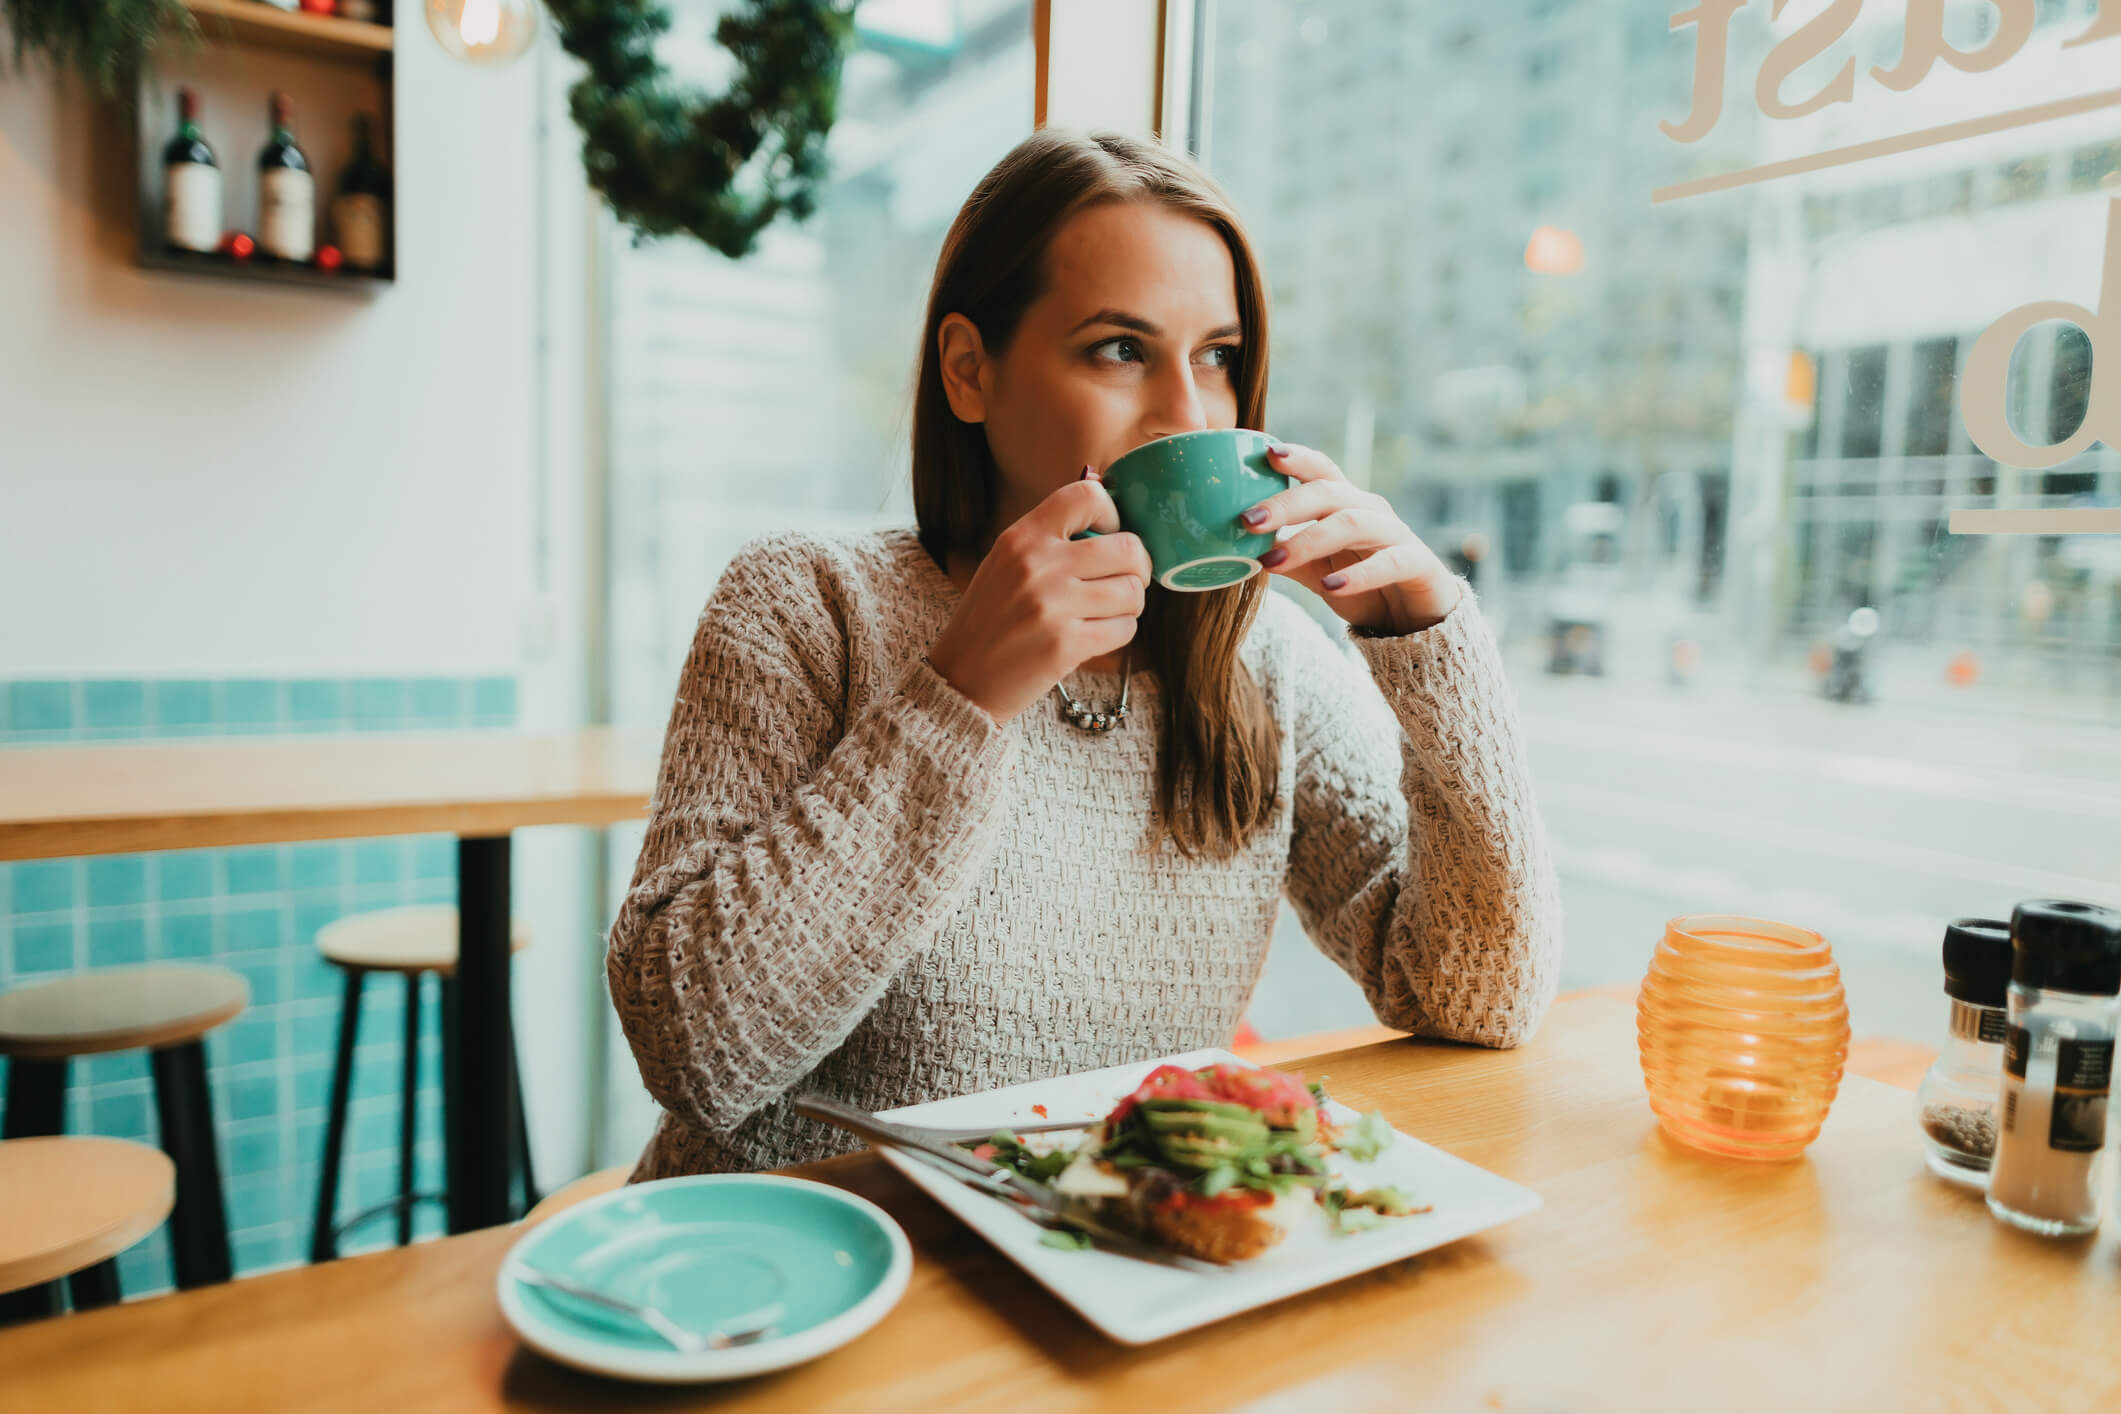 Young woman drinking coffee from a large green mug at a coffee shop.